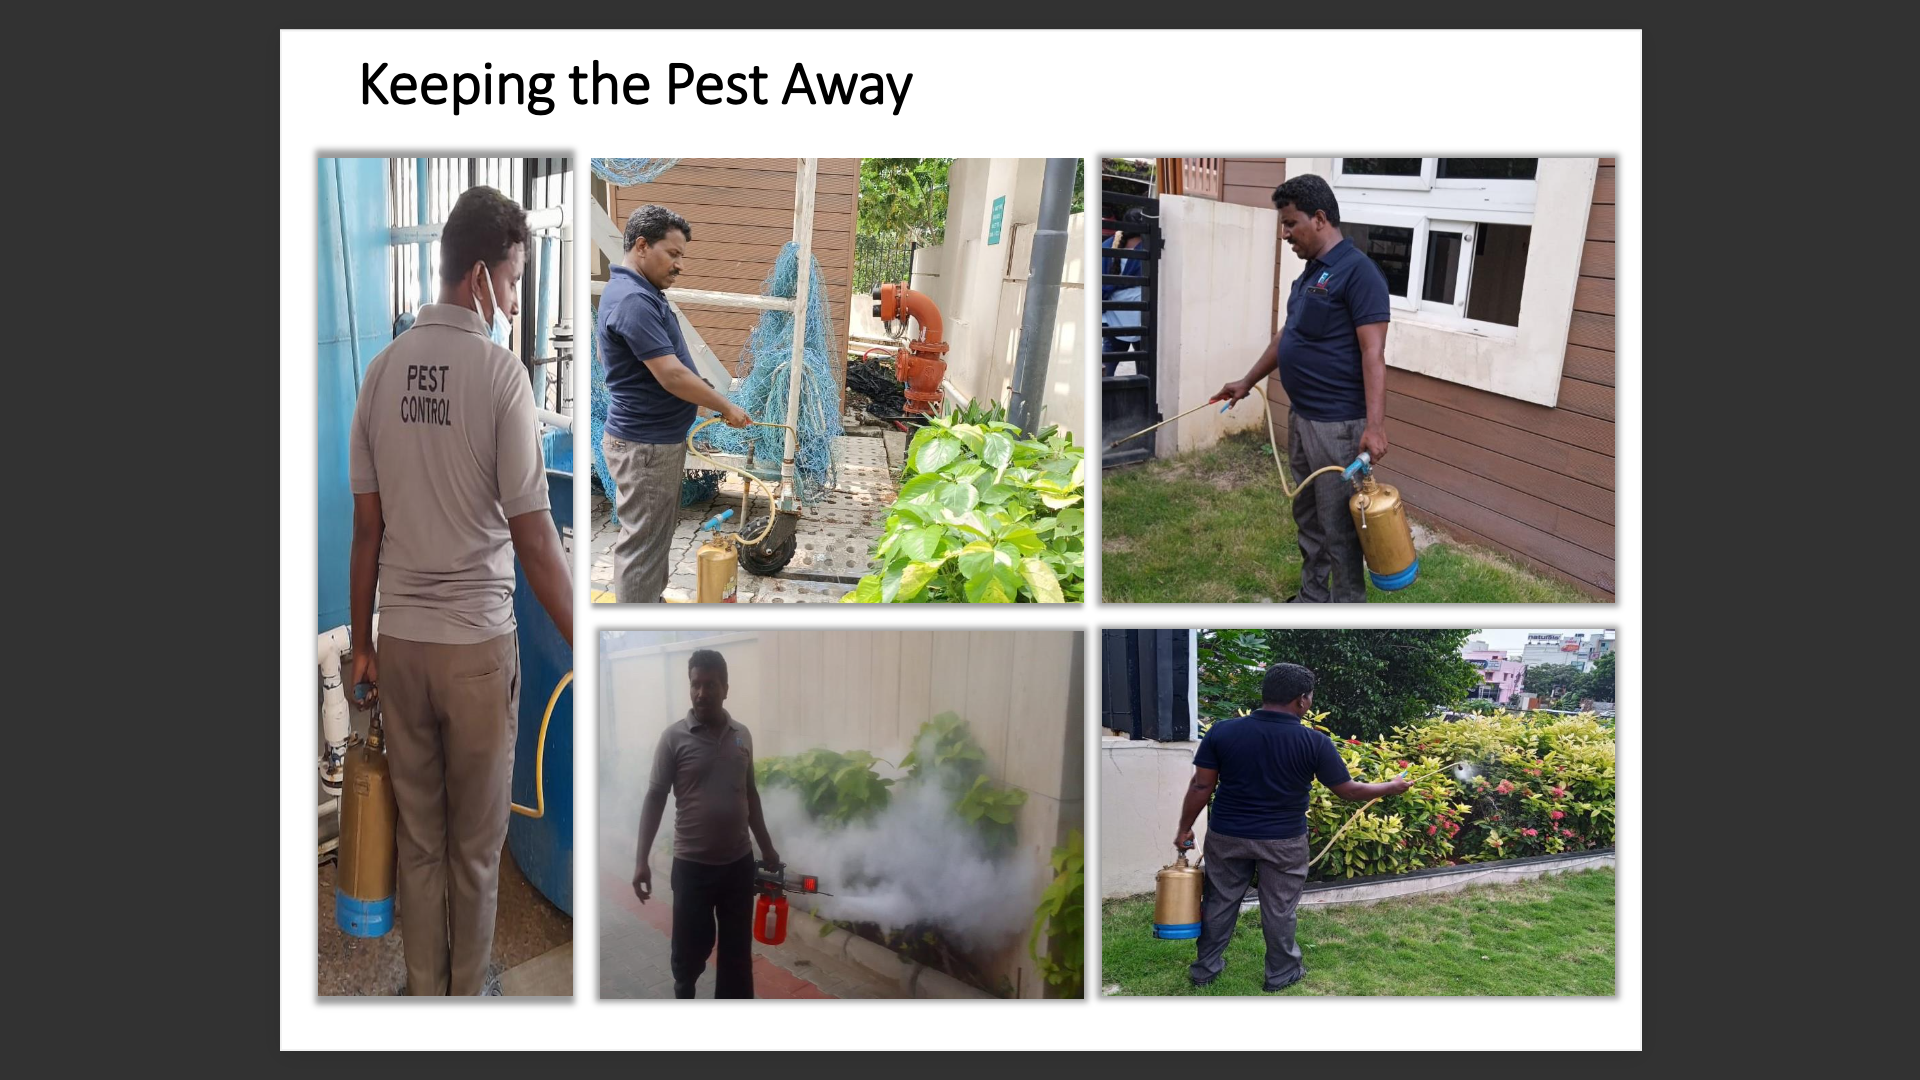 Cleaning Services in chennai, Industrial Cobweb Cleaning, Housekeeping Services, Restroom Cleaning, AMC, Pre and Post event Cleaning, Home before Occupational Cleaning, Mechanical Floor Scrubbing, Security Services, Garden maintenance, Landscaping, Pest Control